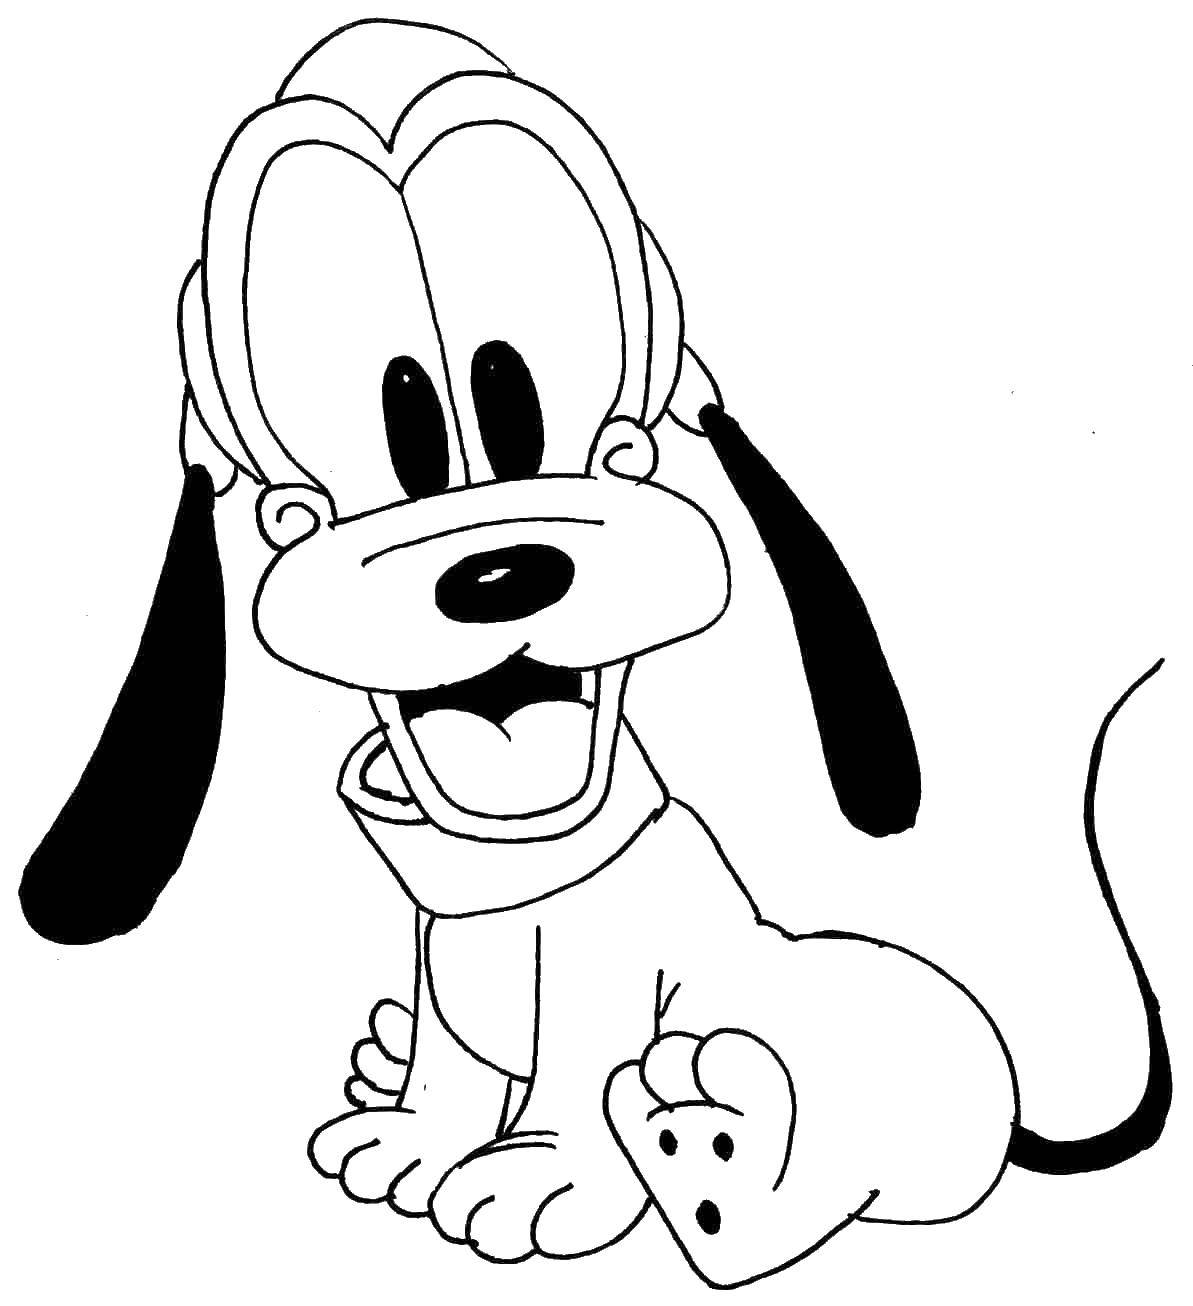 Coloring Baby Pluto. Category cartoons. Tags:  Disney, Mickey Mouse, Pluto.